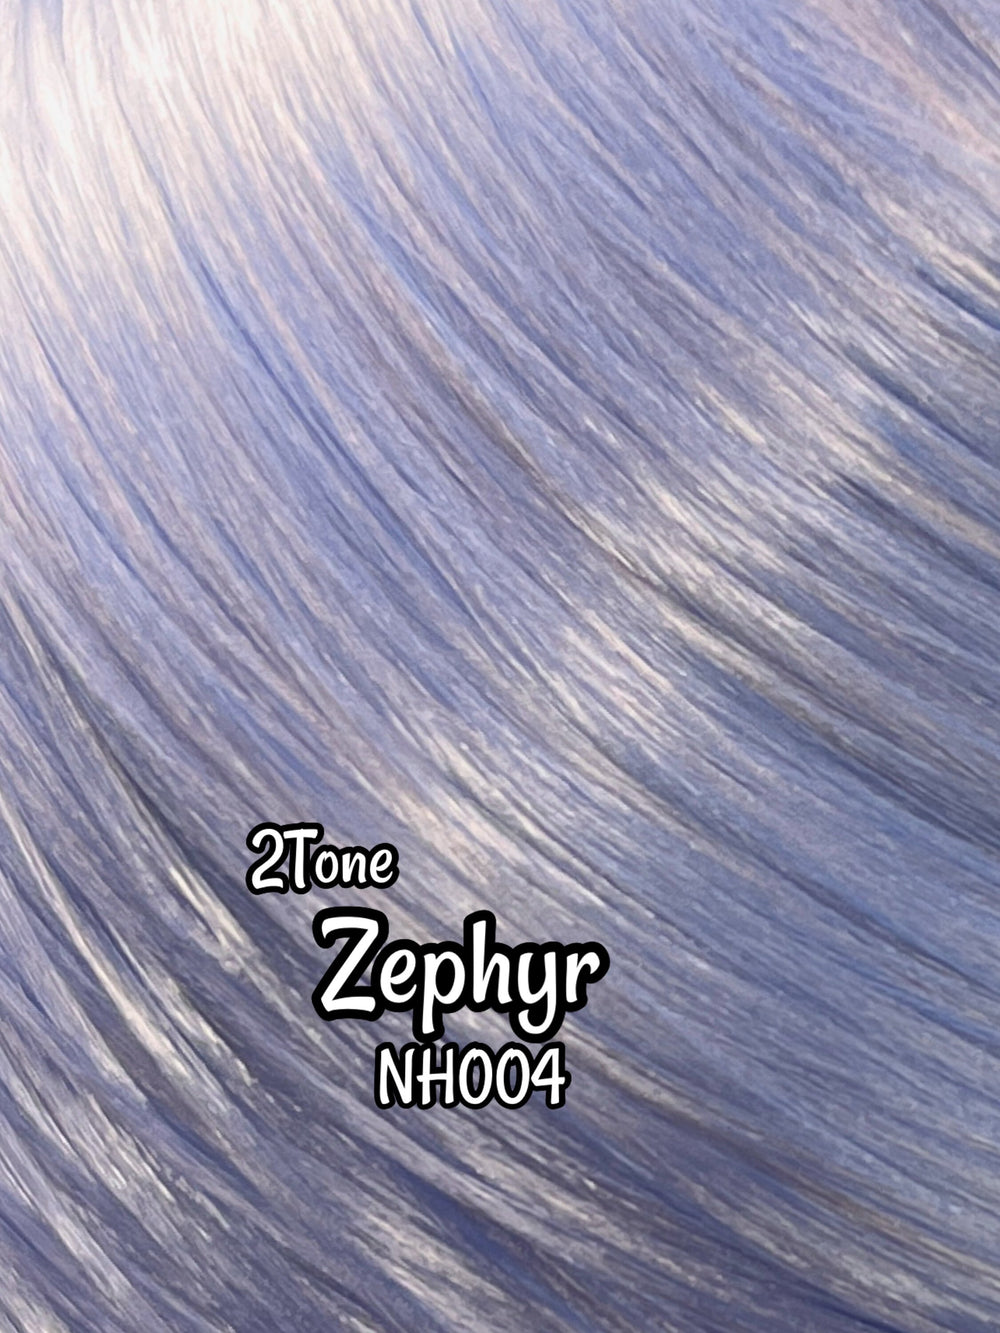 DG-HQ™ 2Tone Zephyr #NH004 blend silver blue gray Contrast Pre-Blended Doll Hair My Little Pony Barbie™ Ever After High™ Rainbow High